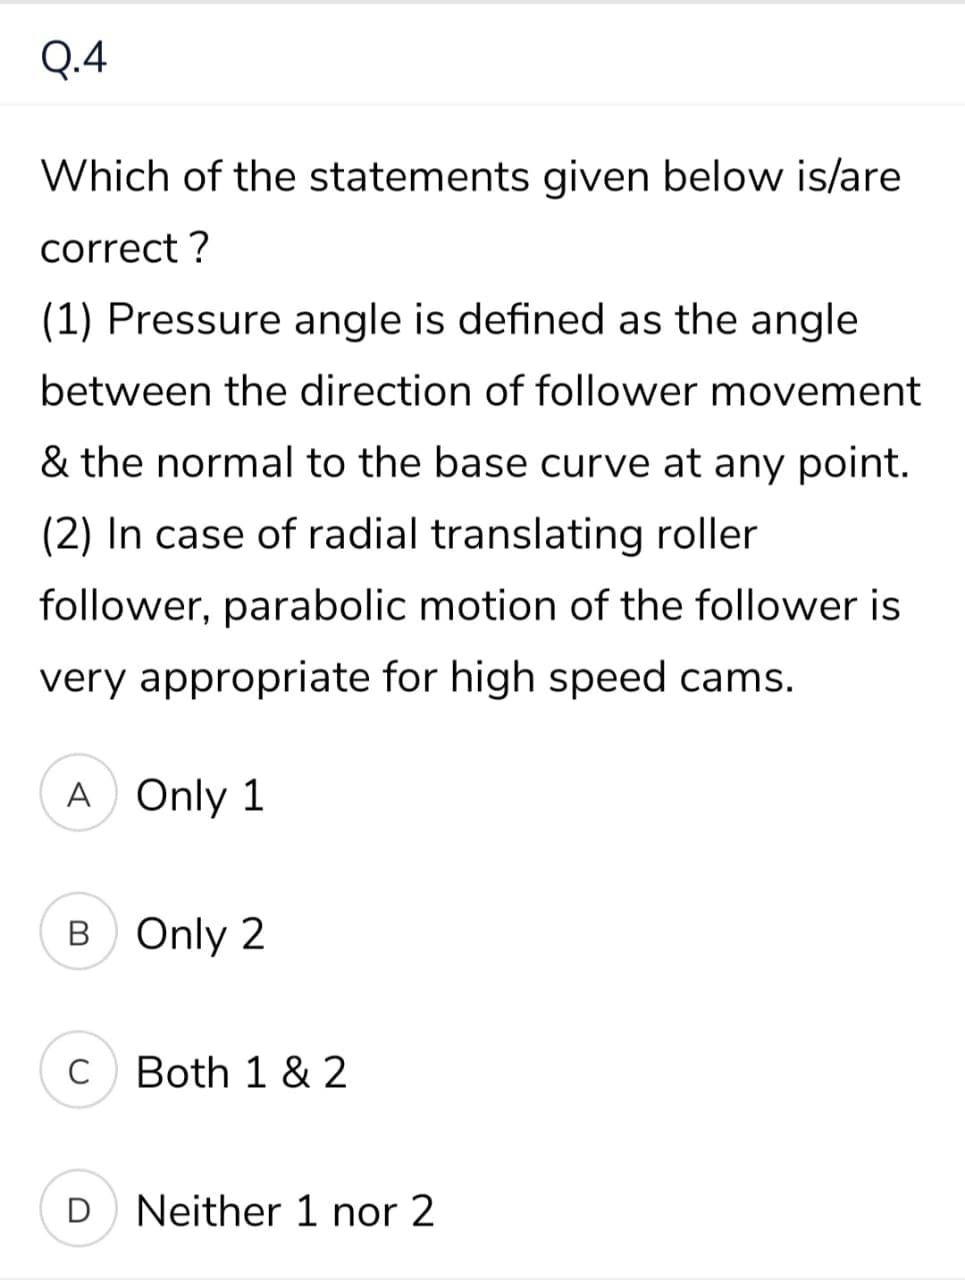 Q.4
Which of the statements given below is/are
correct ?
(1) Pressure angle is defined as the angle
between the direction of follower movement
& the normal to the base curve at any point.
(2) In case of radial translating roller
follower, parabolic motion of the follower is
very appropriate for high speed cams.
A Only 1
B Only 2
C
Both 1 & 2
D Neither 1 nor 2
